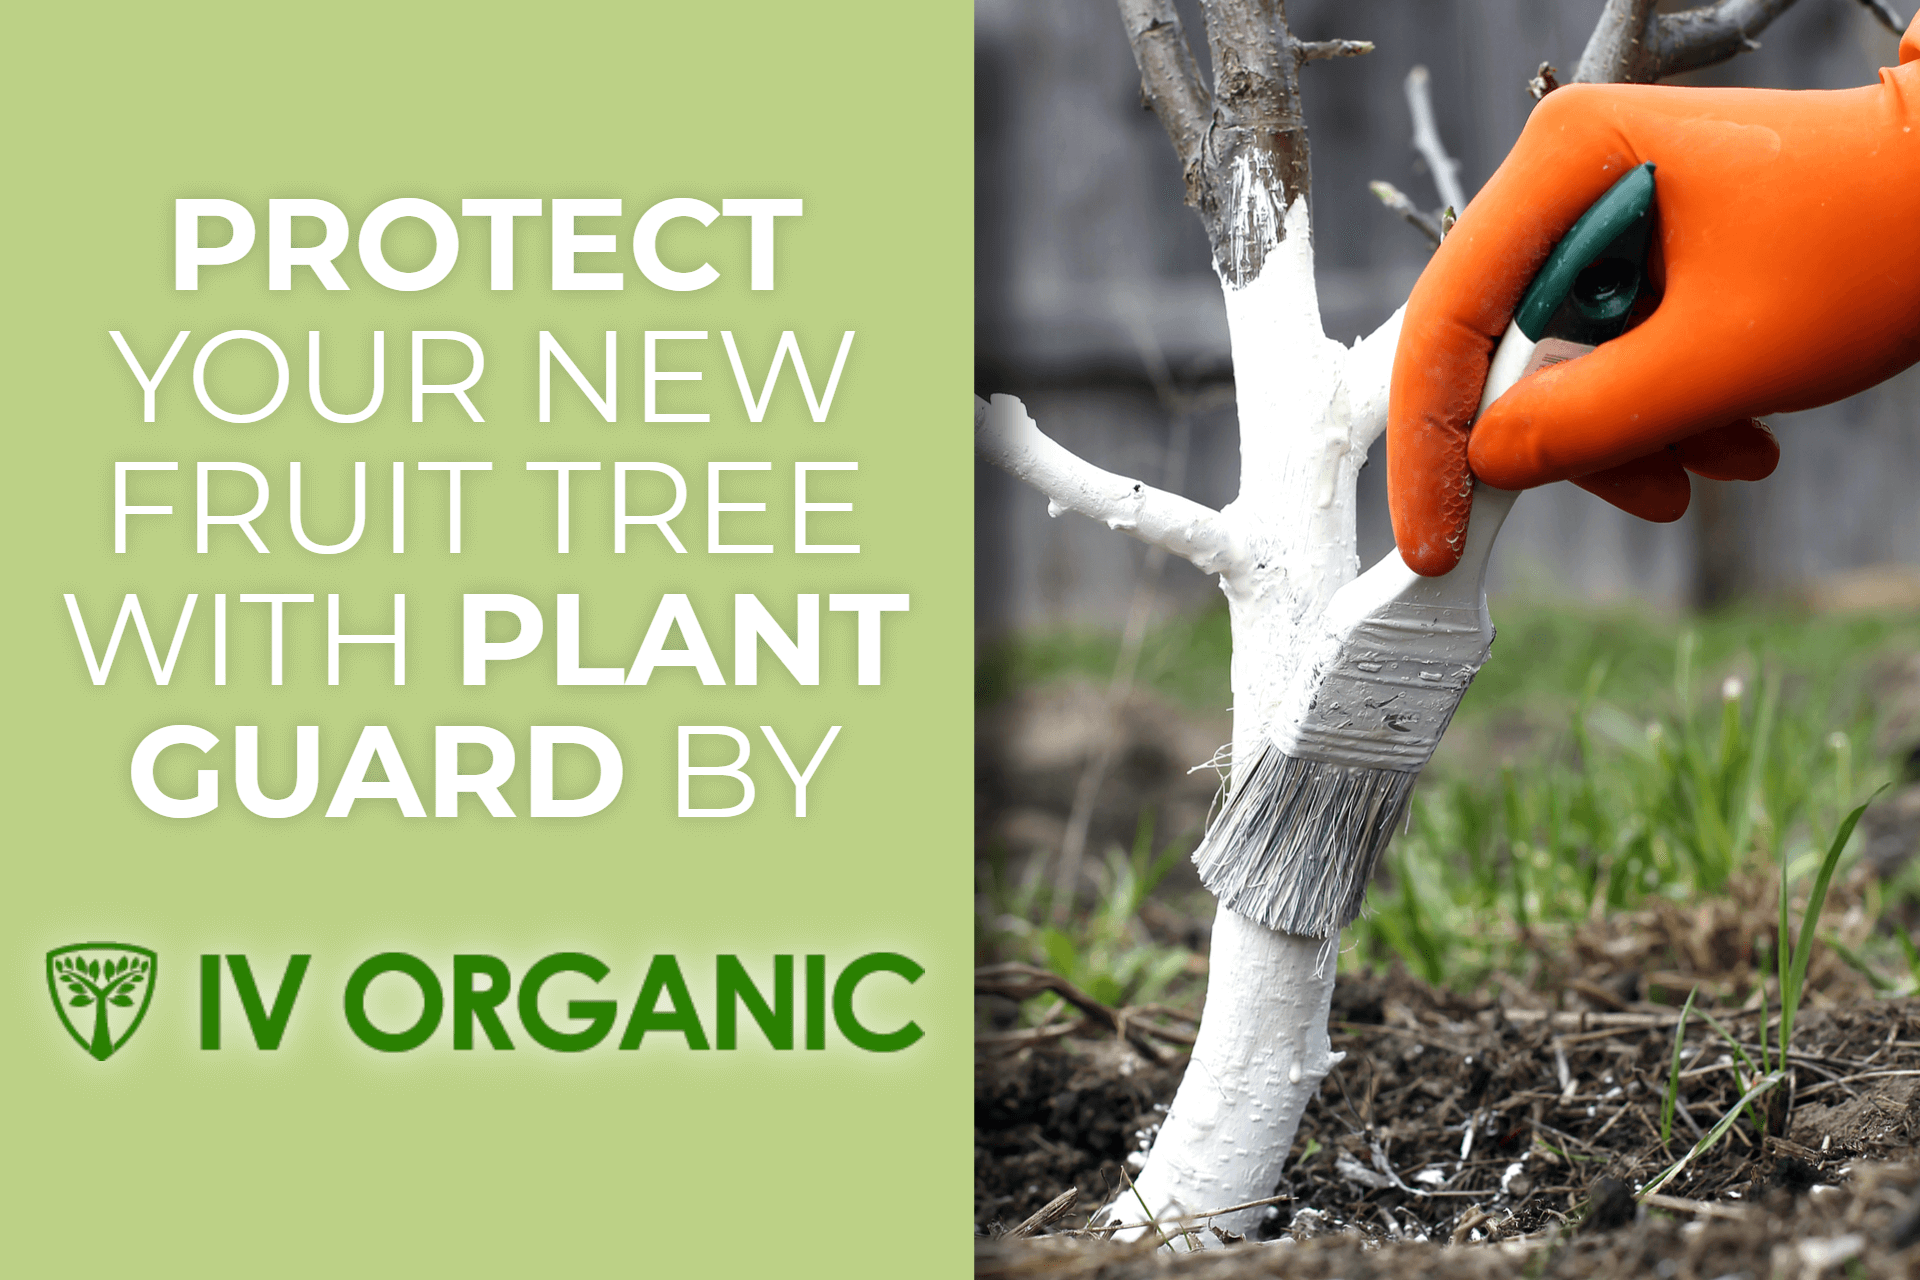 Protect Your Trees With IV ORGANIC Plant Guard!